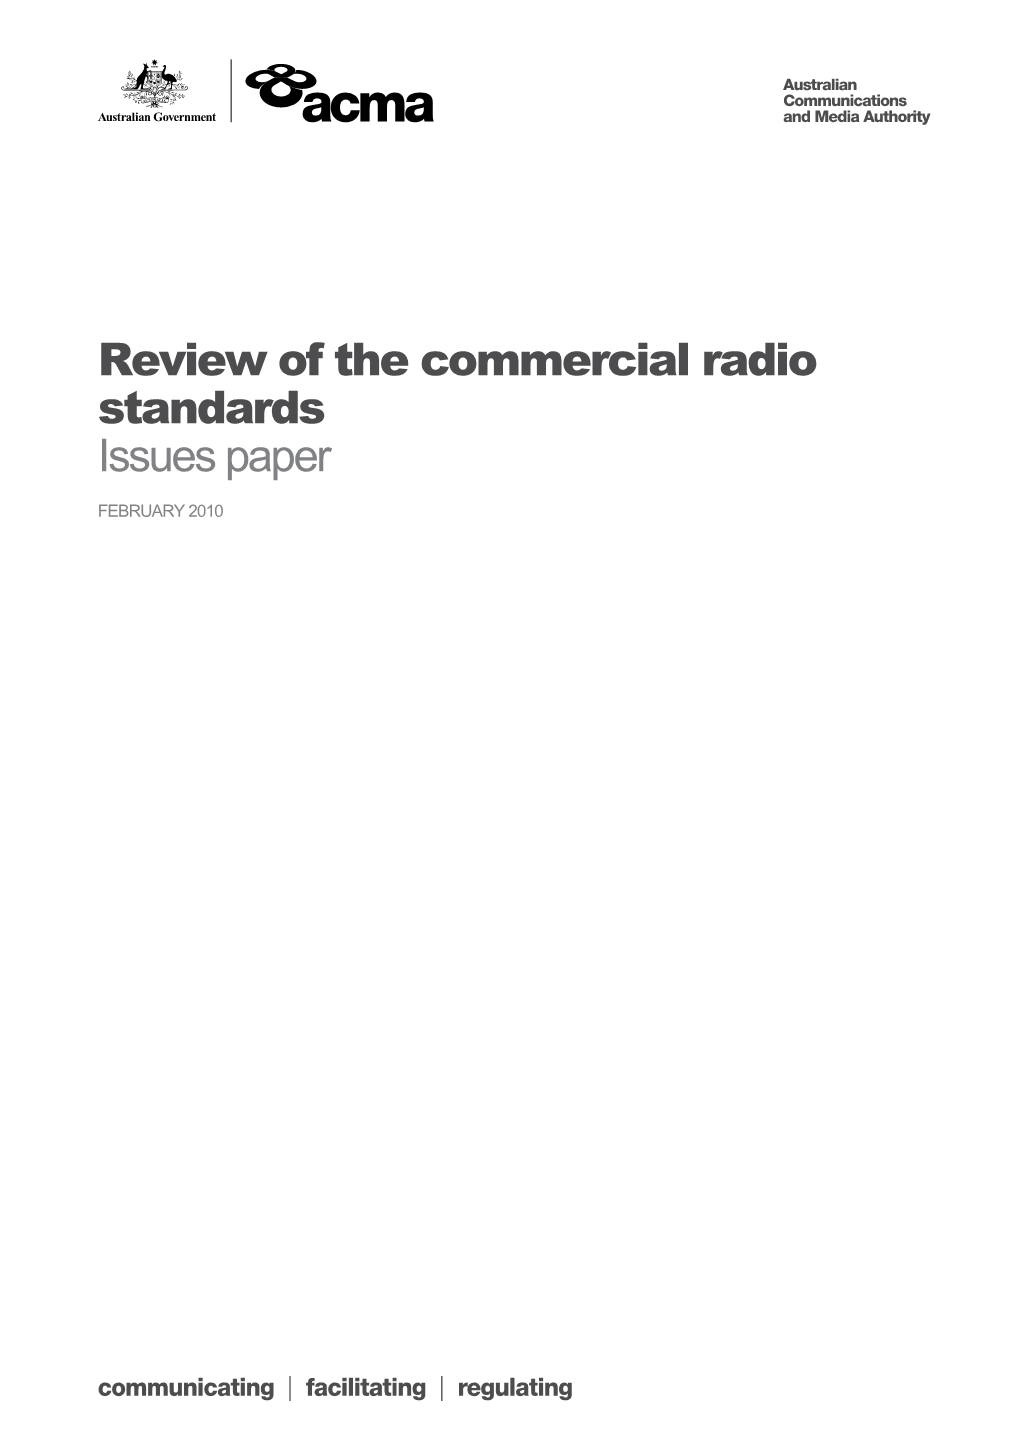 Review of the Commercial Radio Standards - Issues Paper